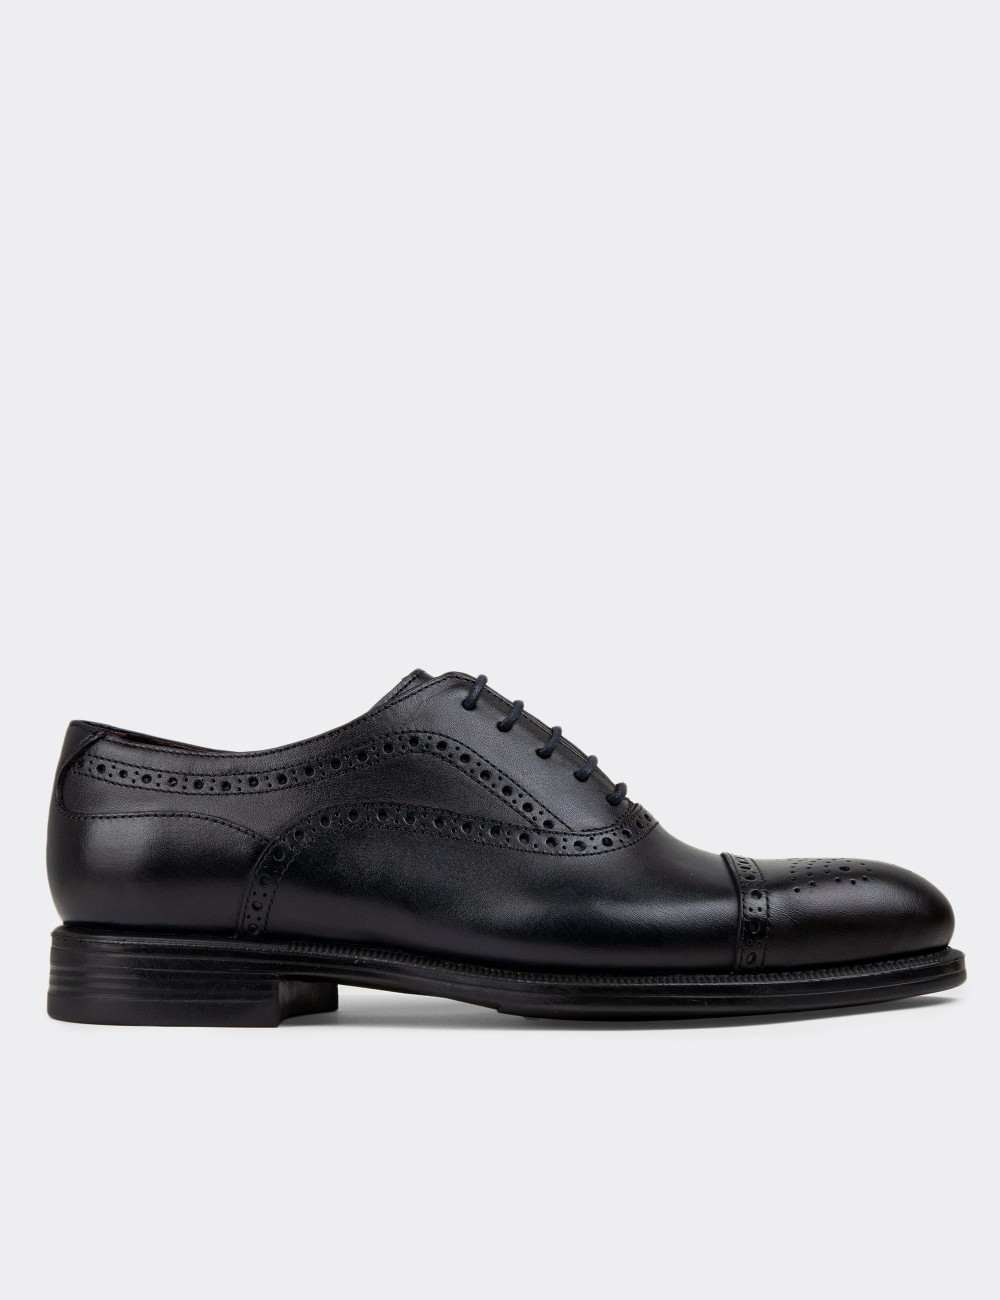 Navy Leather Classic Shoes - 01813MLCVC01